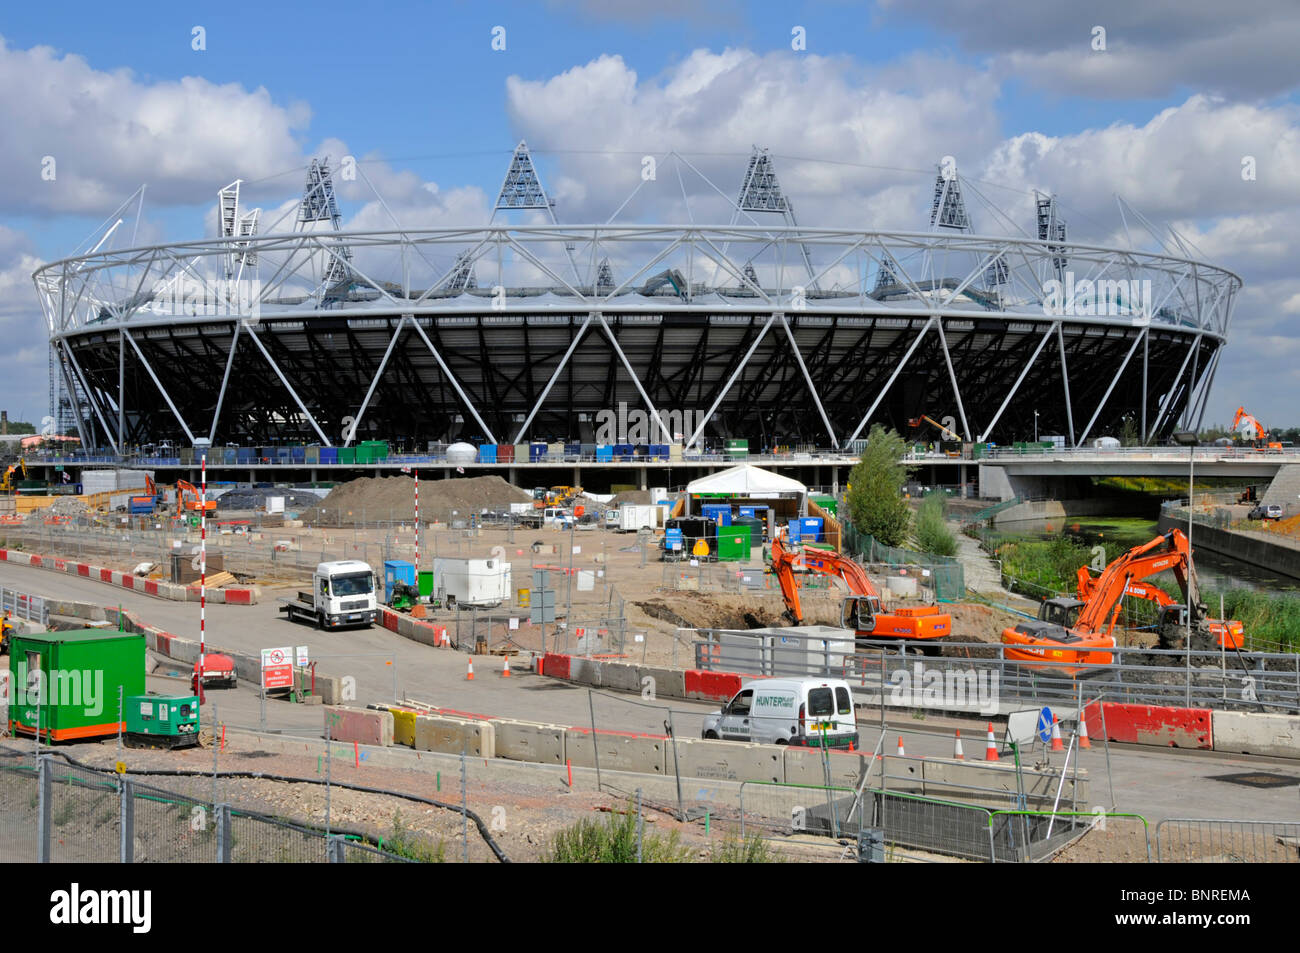 2012 Olympic stadium structure complete on building construction site paving & road work in progress at Stratford City Newham East London England UK Stock Photo